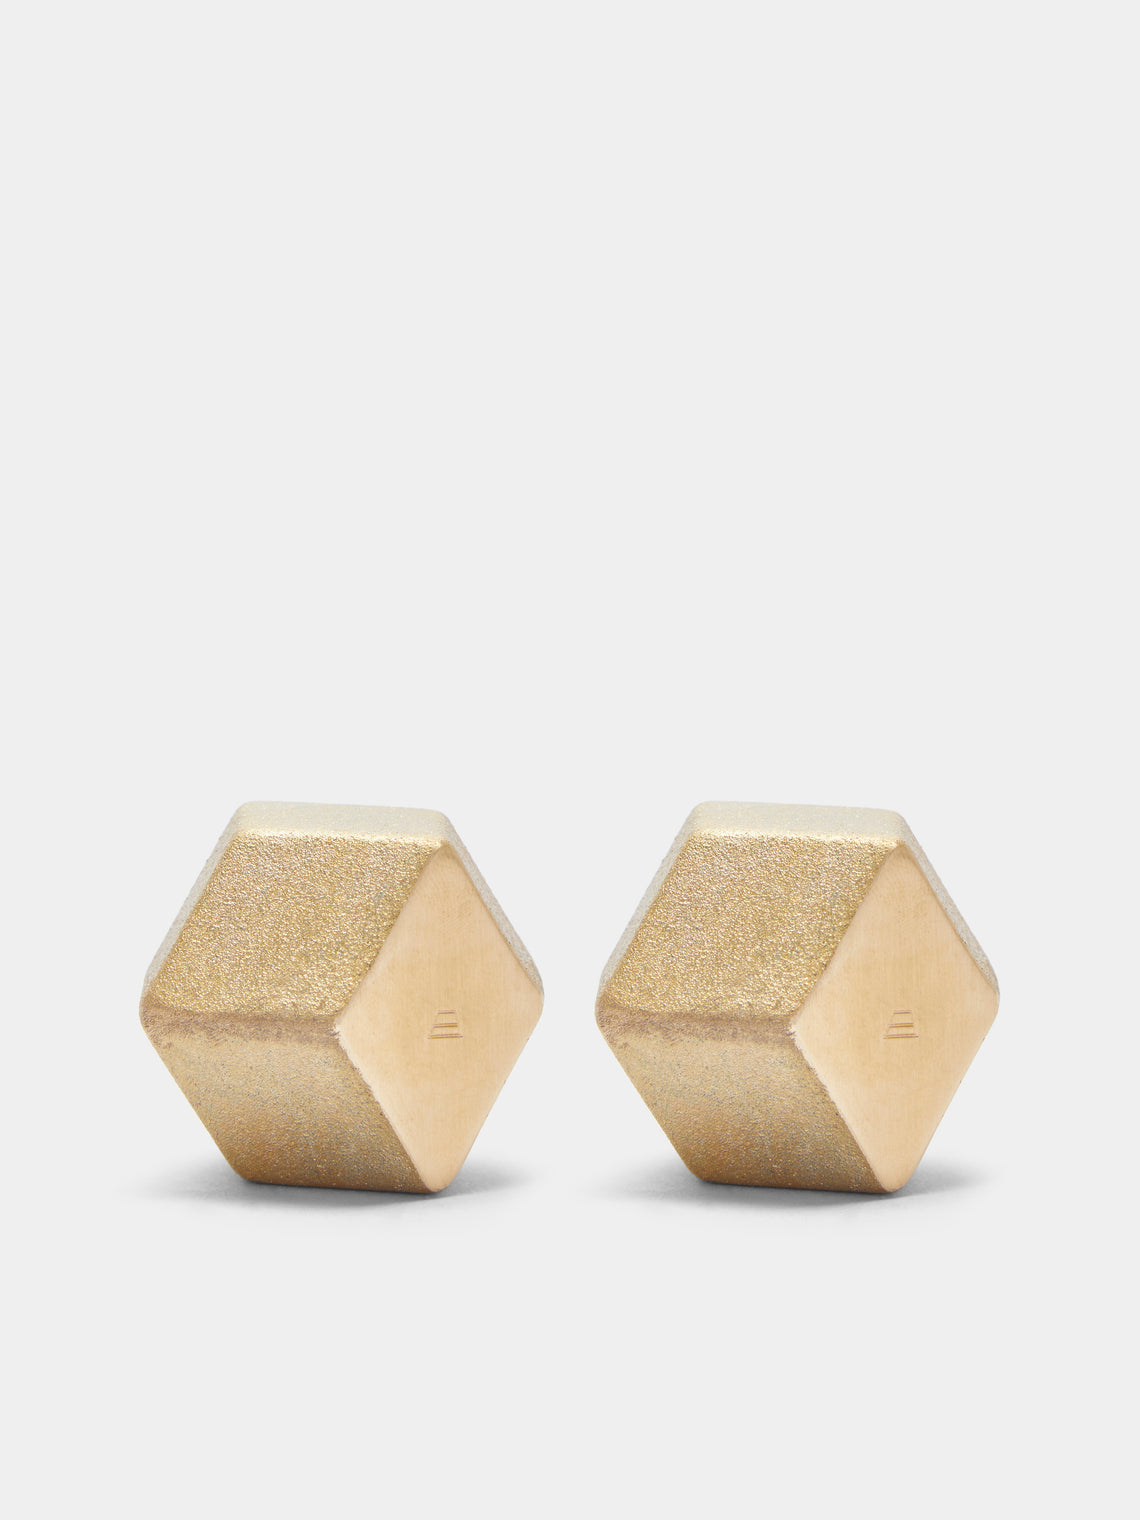 Futagami - Brass Paperweights (Set of 2) -  - ABASK